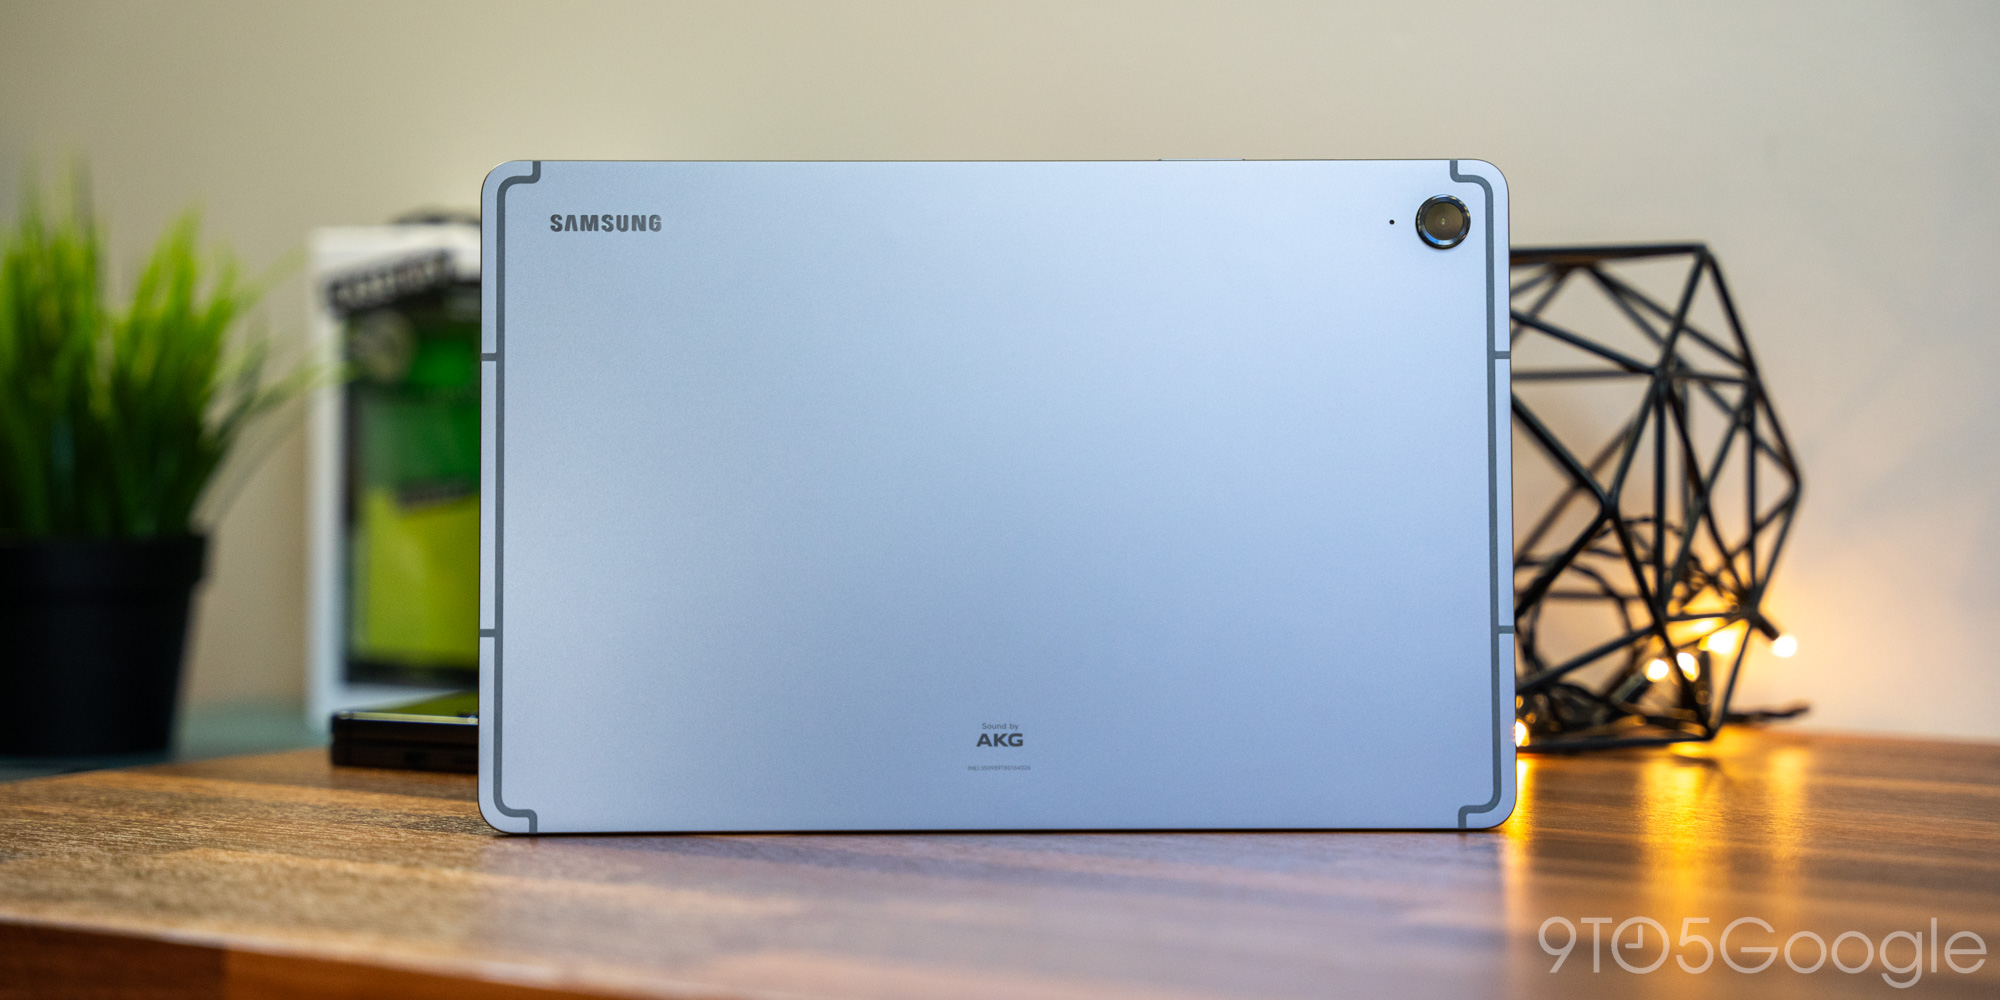 The Galaxy Tab S9 FE is all the tablet you'll ever need